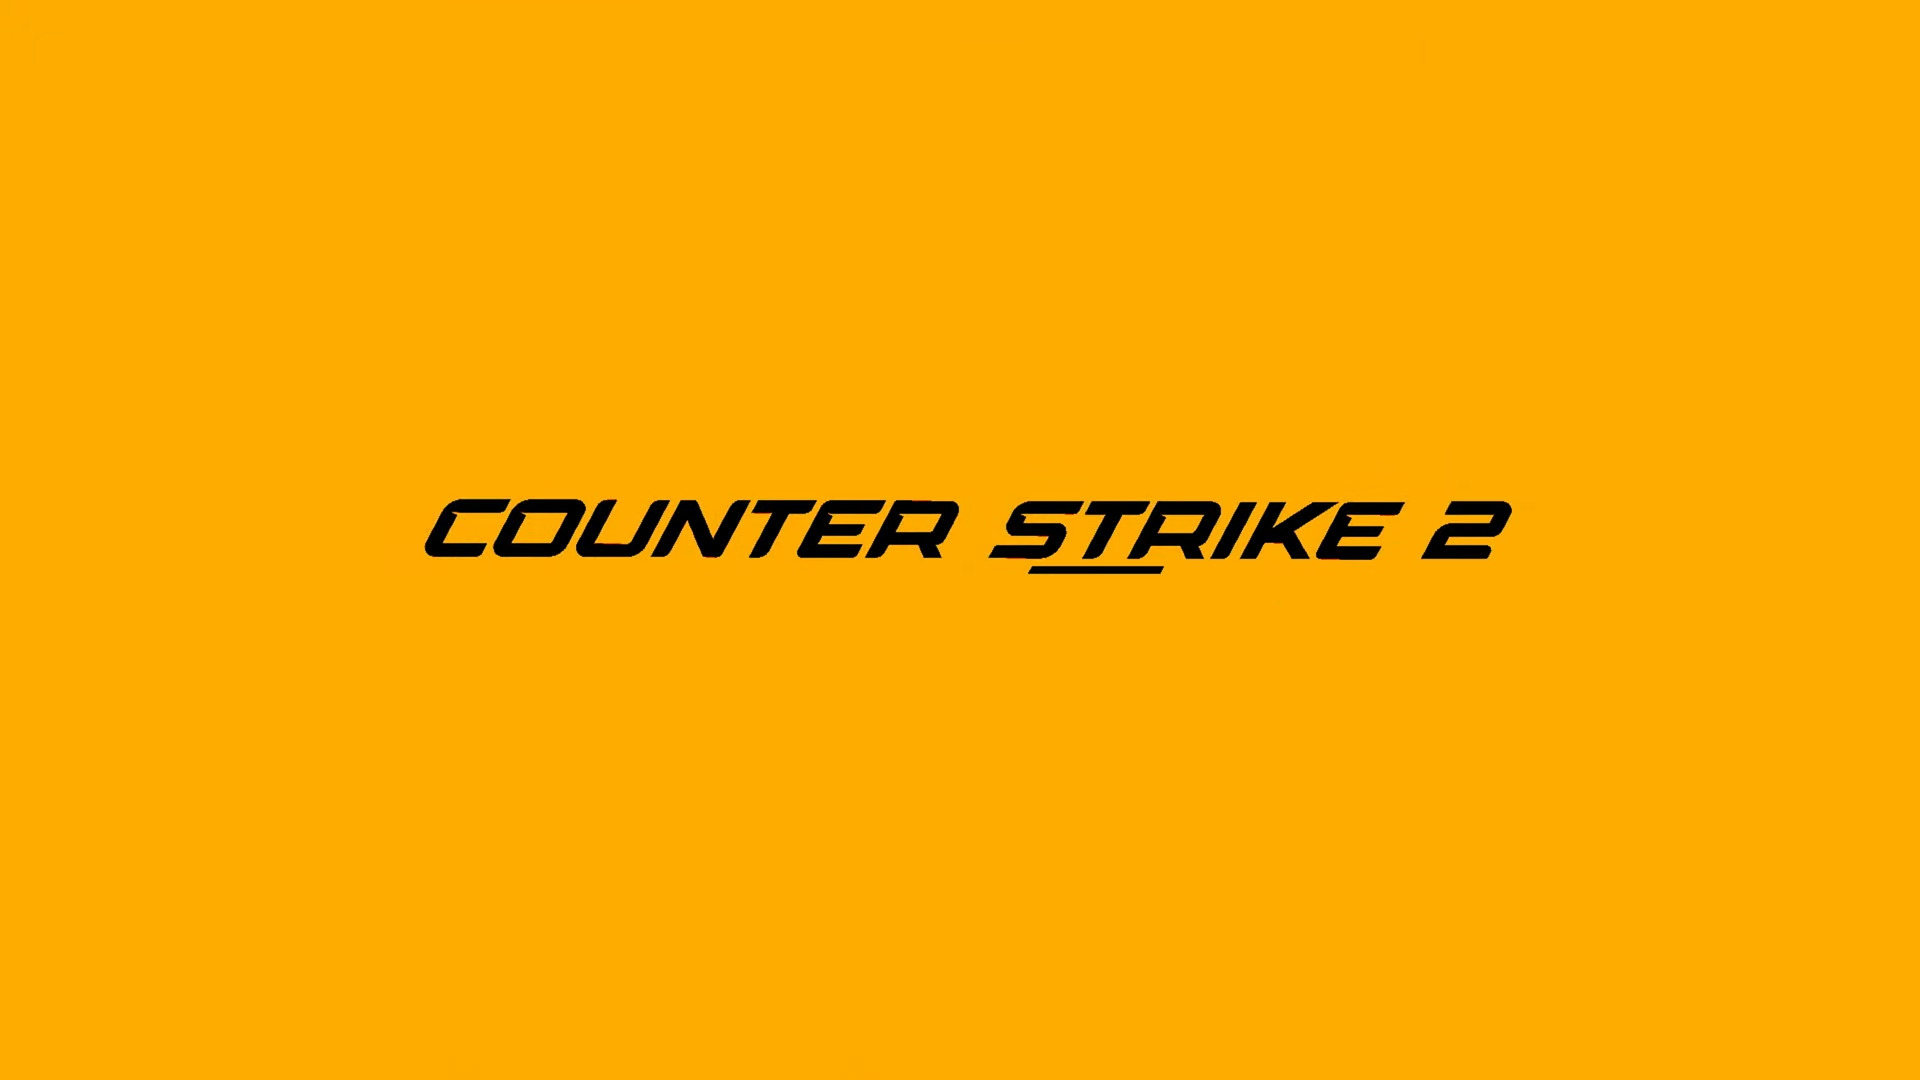 Counter-Strike 2 Introduces New Skill Rating System, Per-Map Skill Groups and More